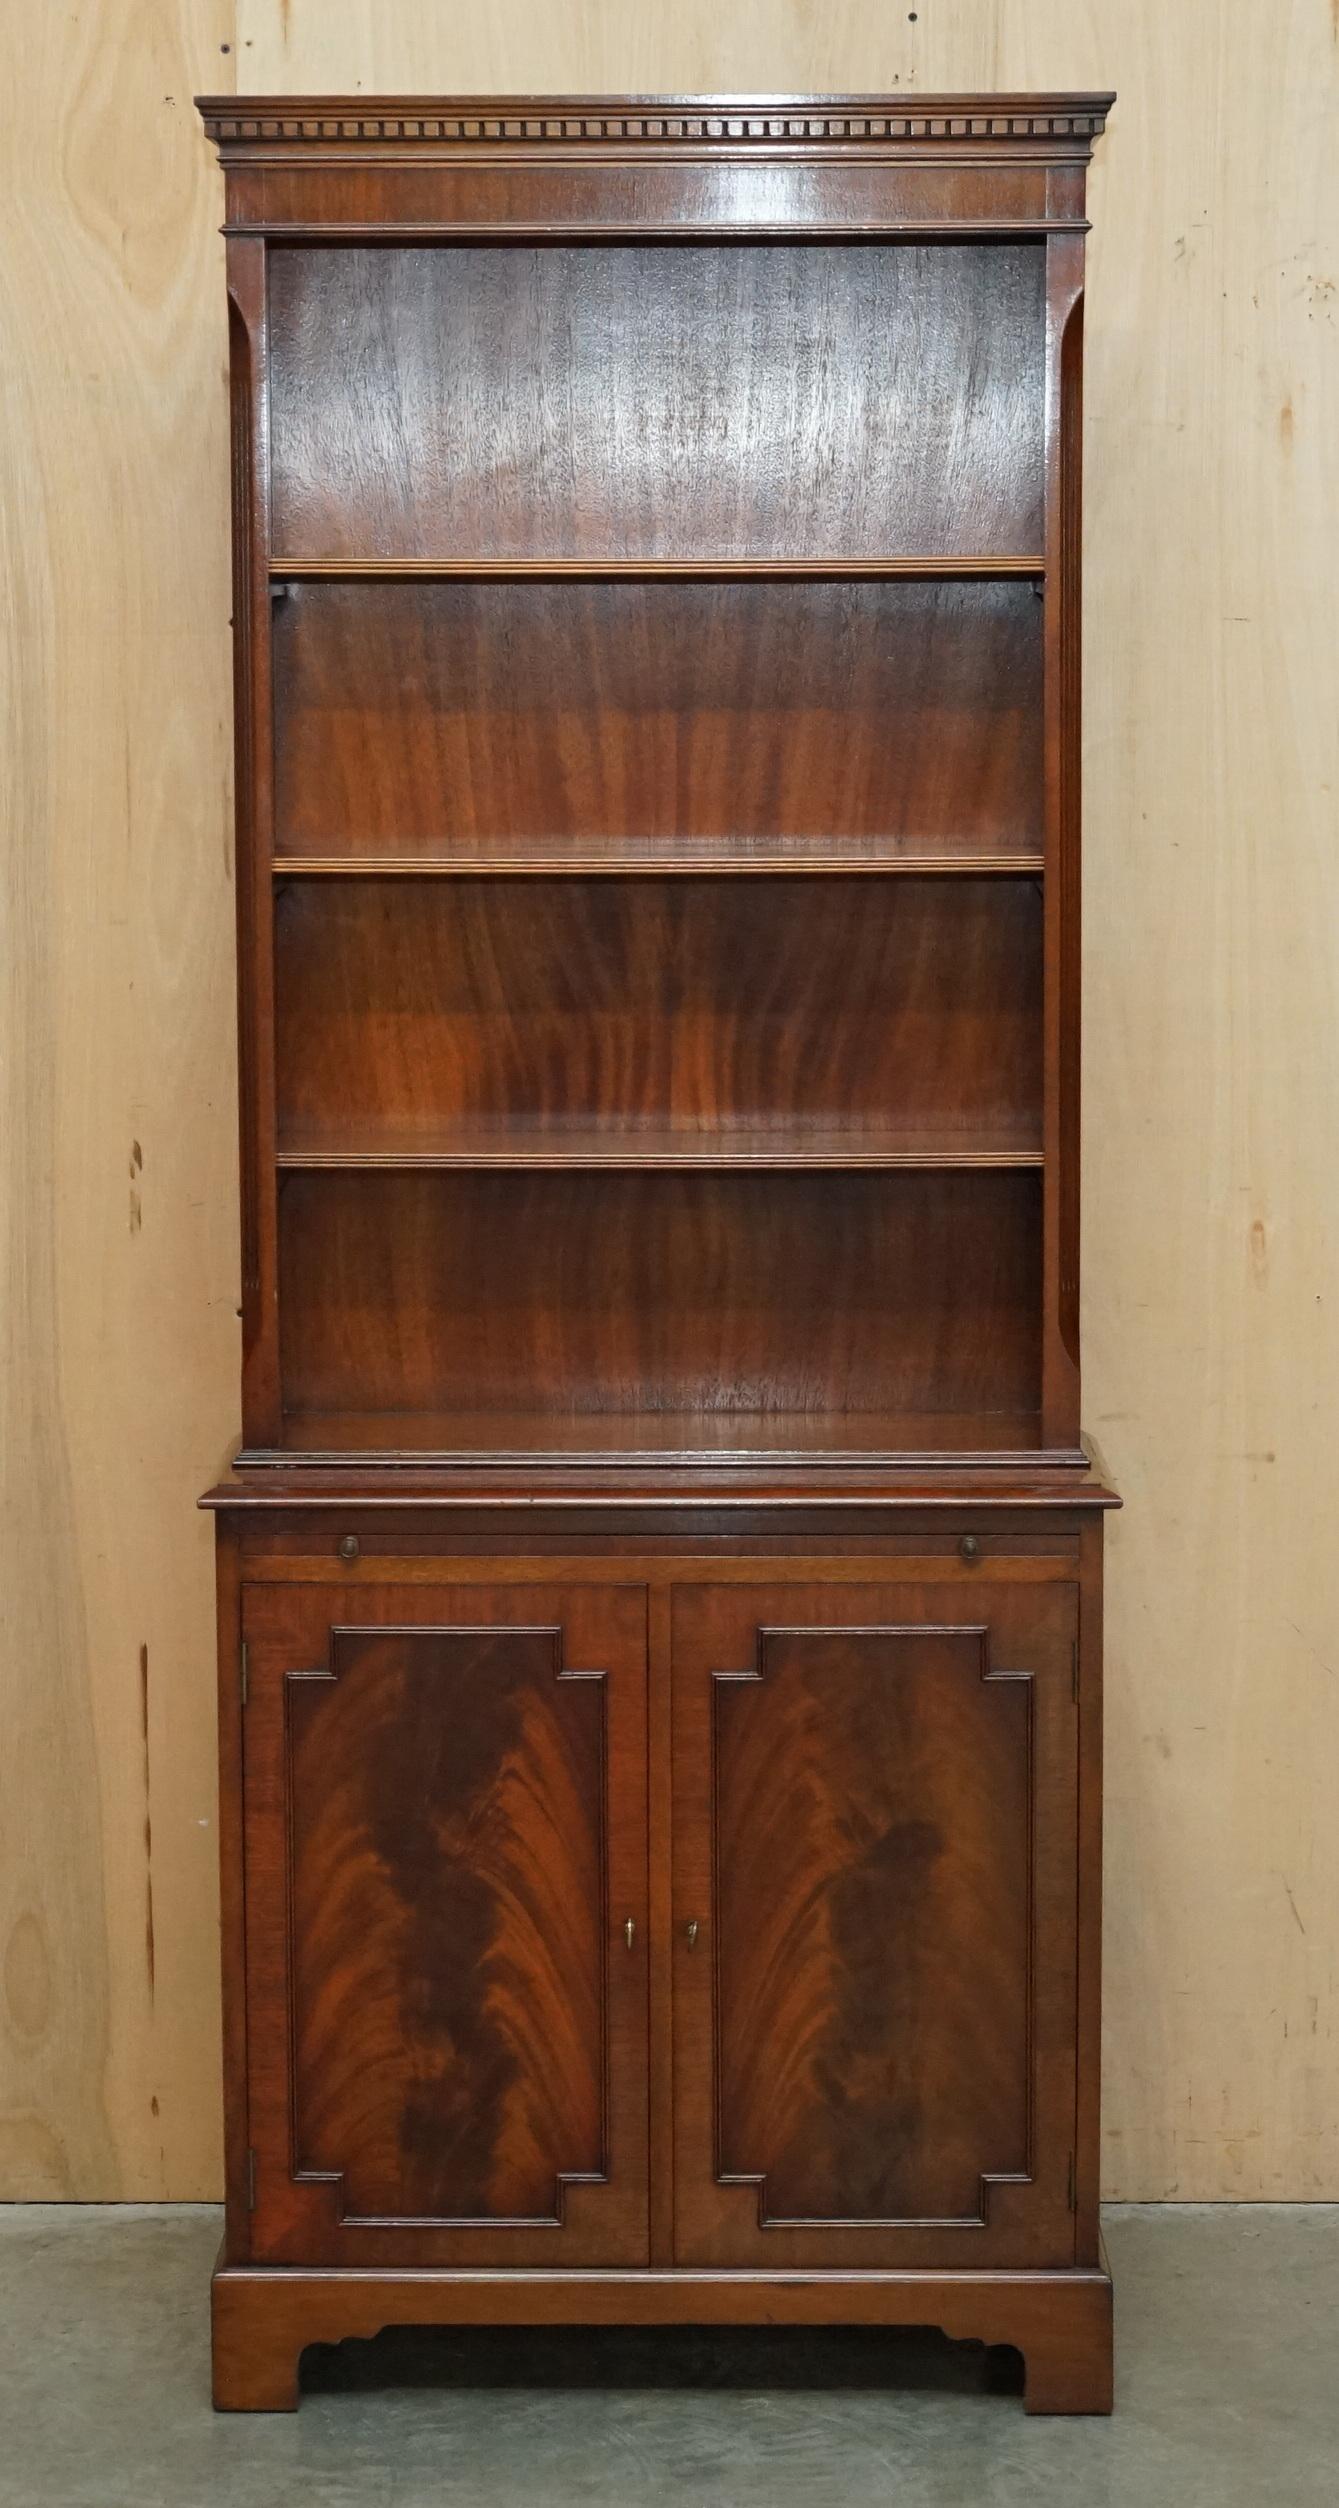 Victorian EXQUISITE PAIR OF FLAMED HARDWOOD LIBRARY BOOKCASES SLIP DRiNKS SERVING SHELVES For Sale